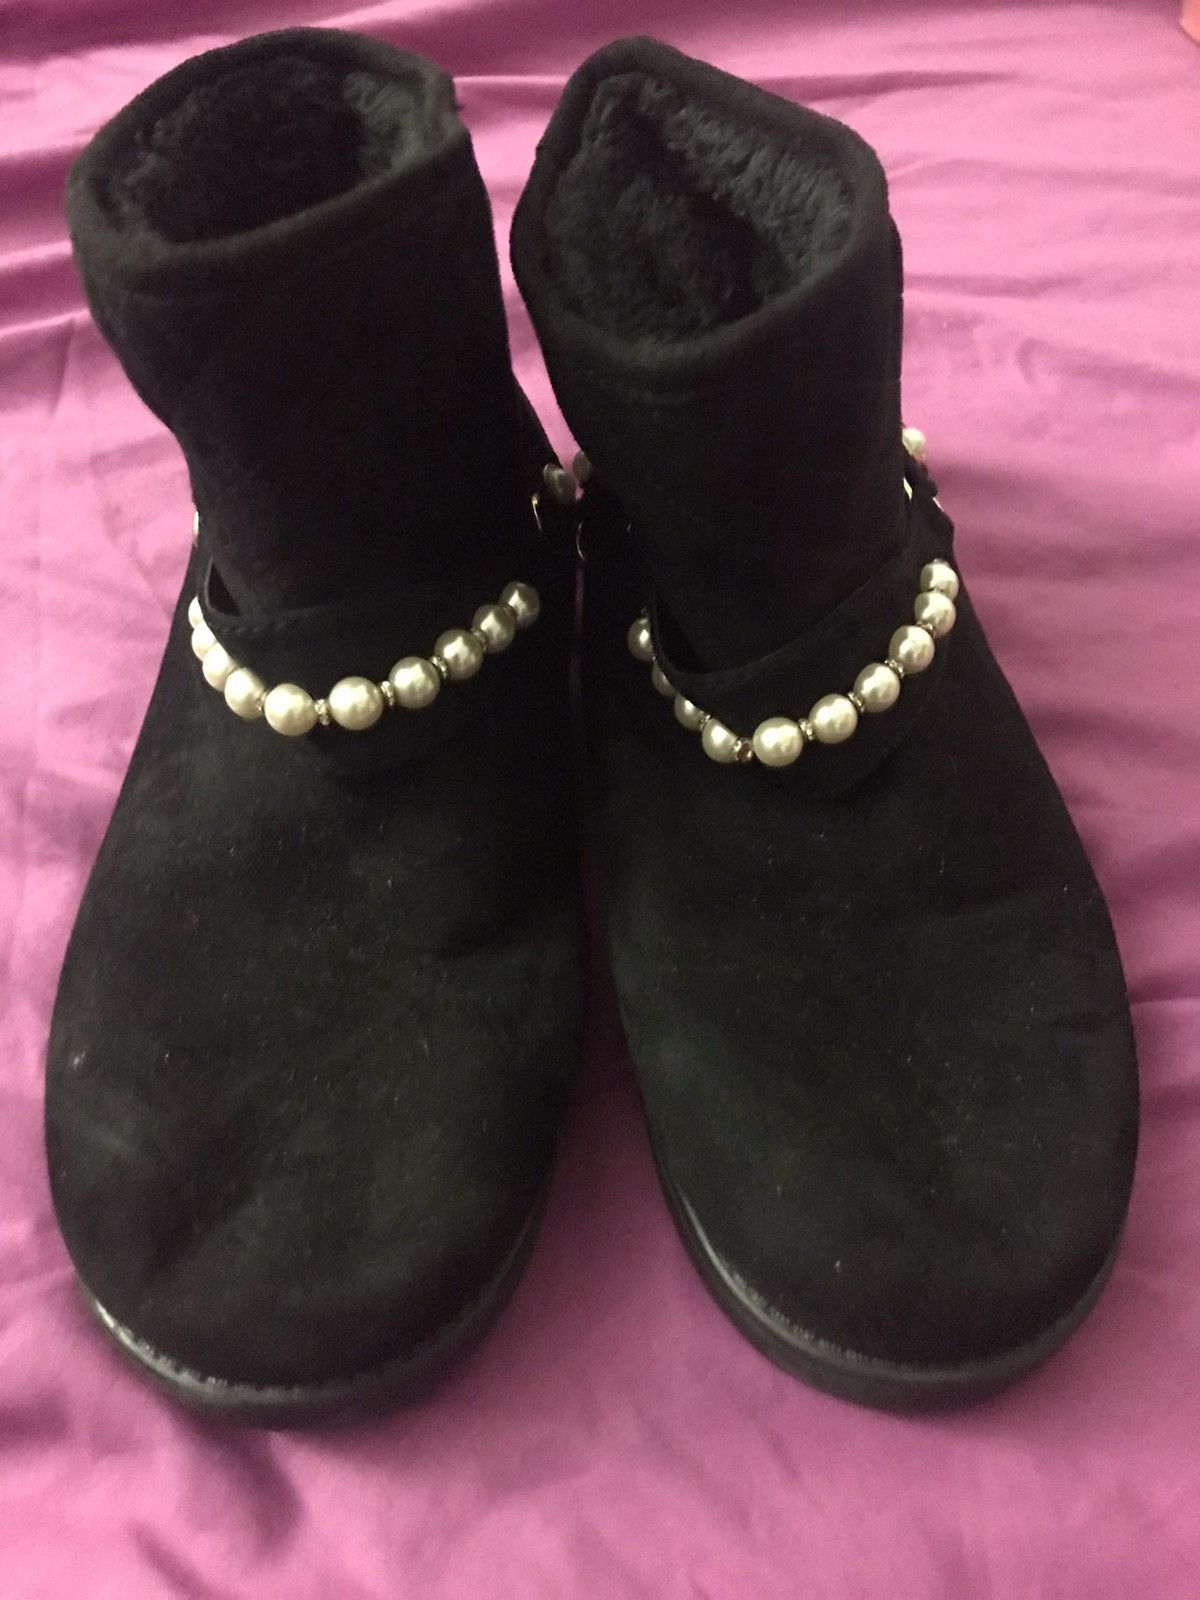 The Unbranded Brand Women’s Winter Boots With Fur & Beads Size US 10 / IT 40 - 2 Preview